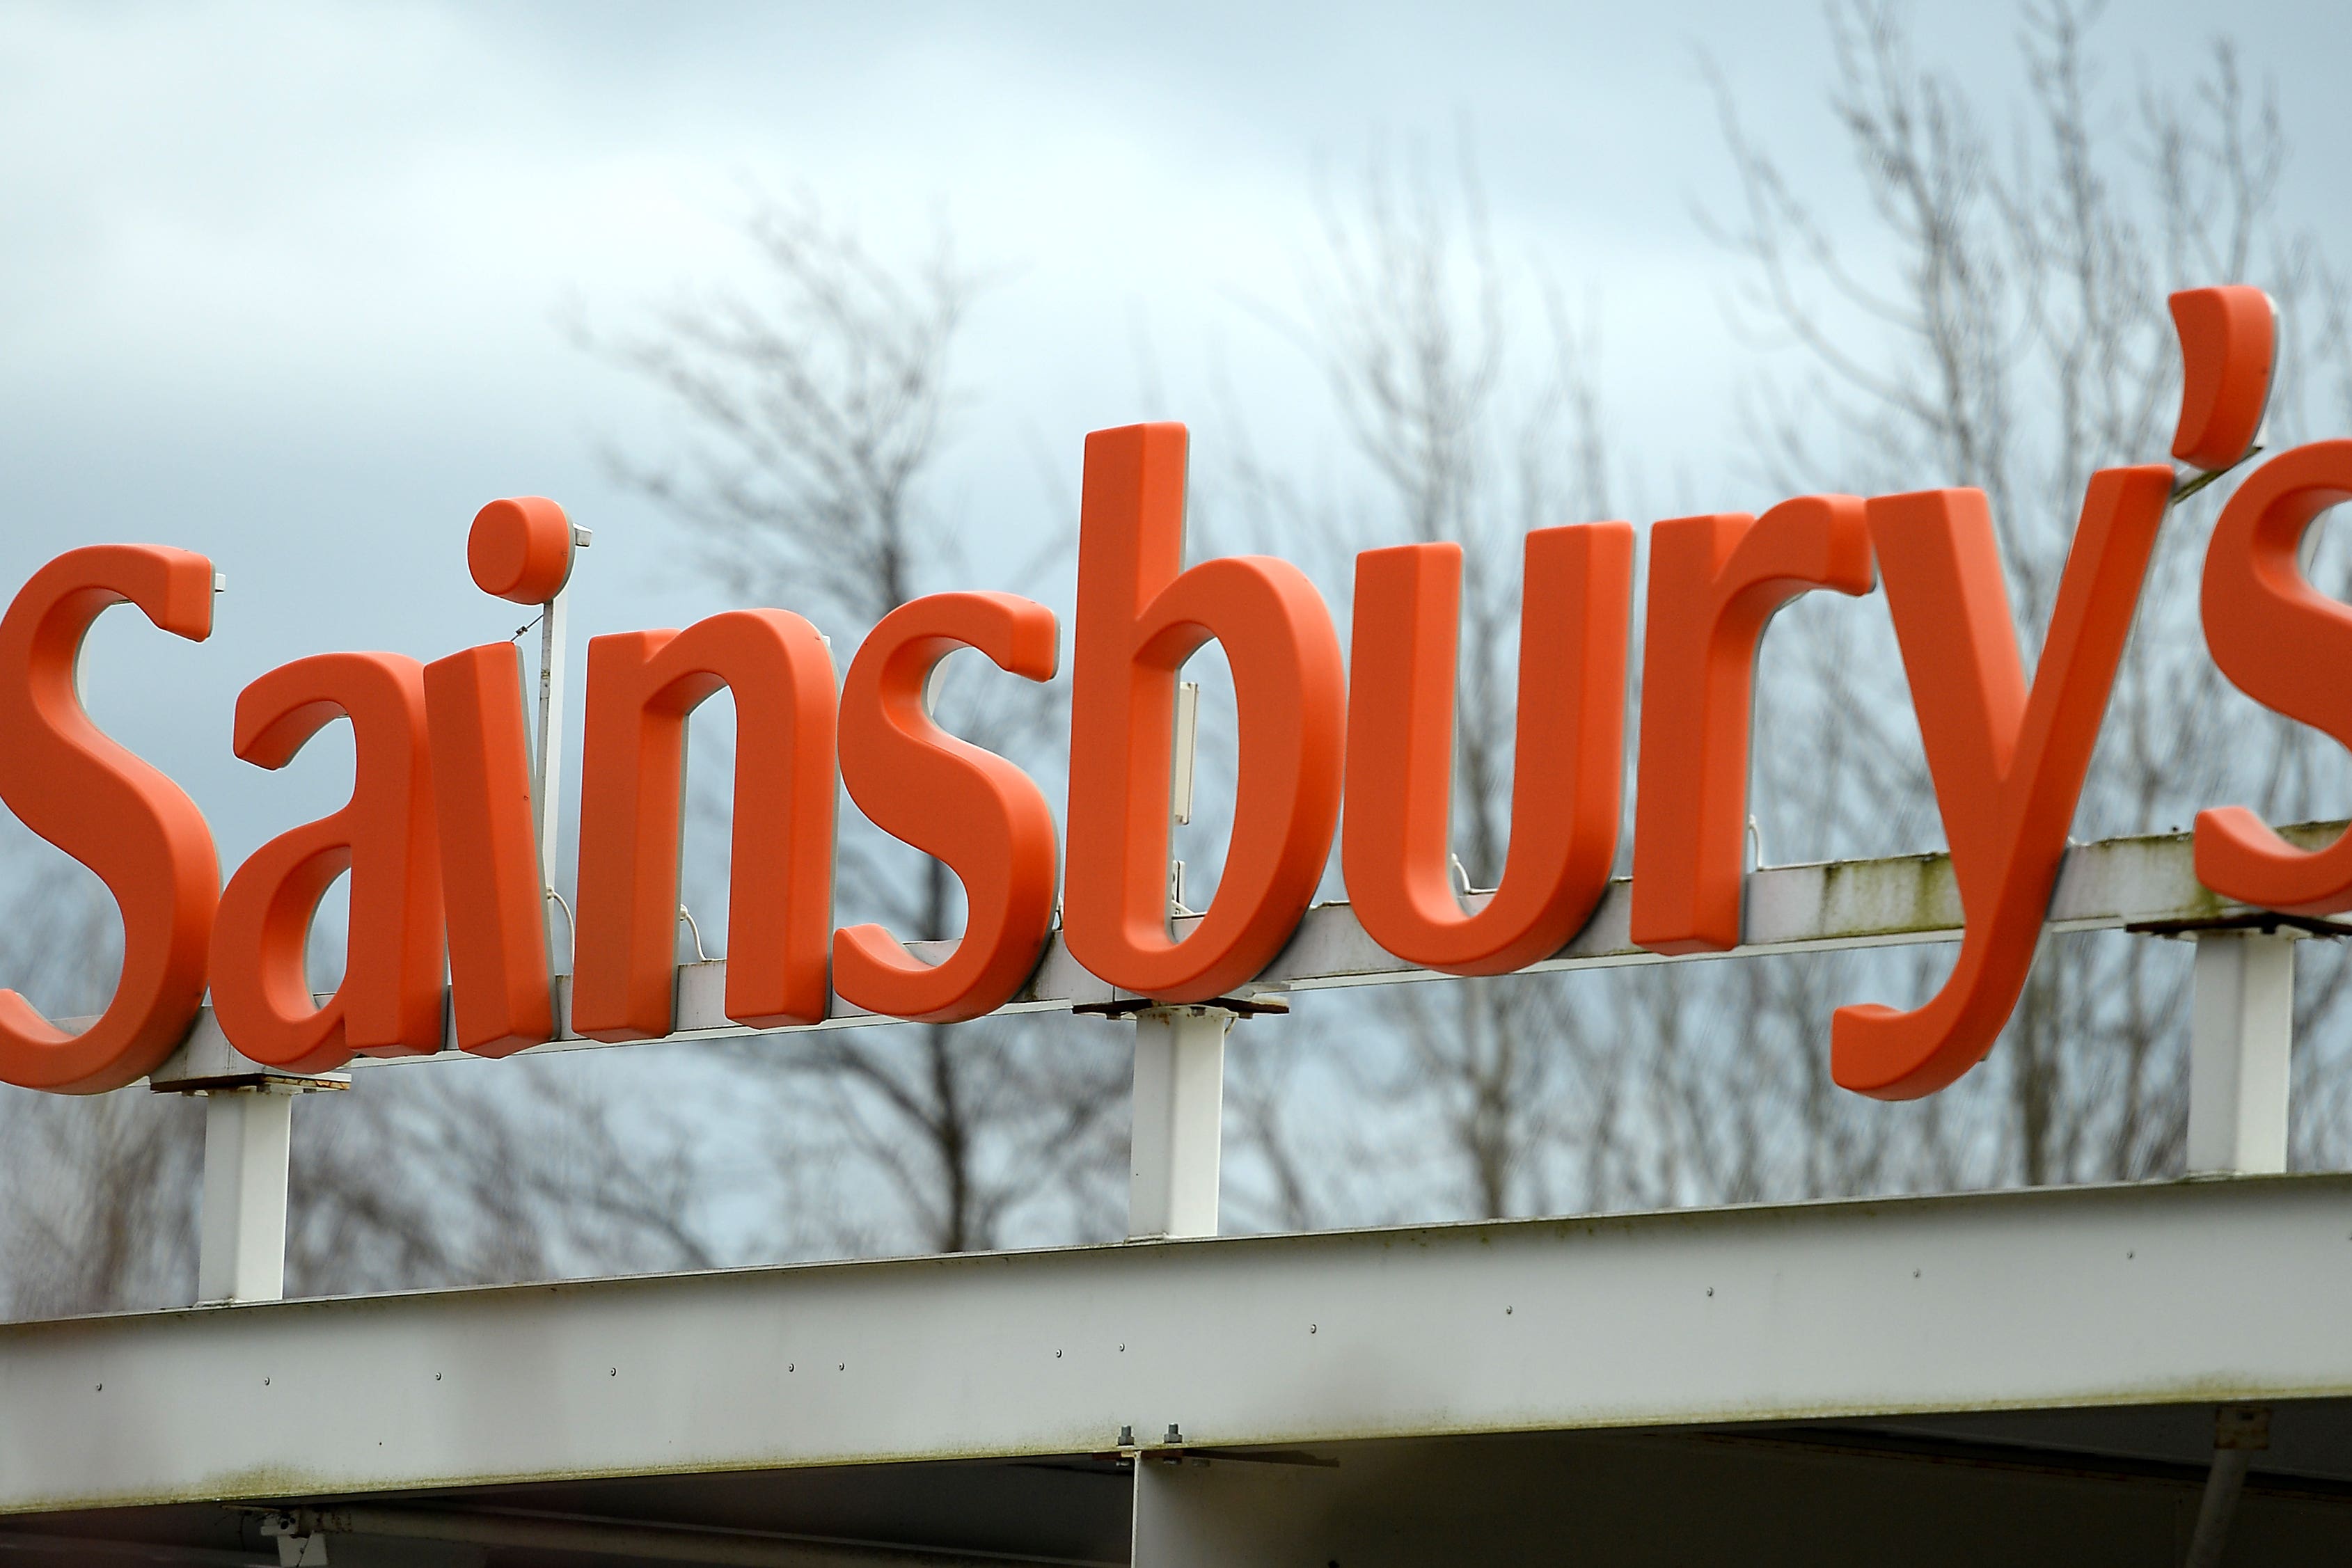 Supermarket giant Sainsbury’s has boosted its earnings outlook thanks to soaring grocery sales as it focused on keeping food costs down for cash-strapped customers (Andrew Matthews/PA)